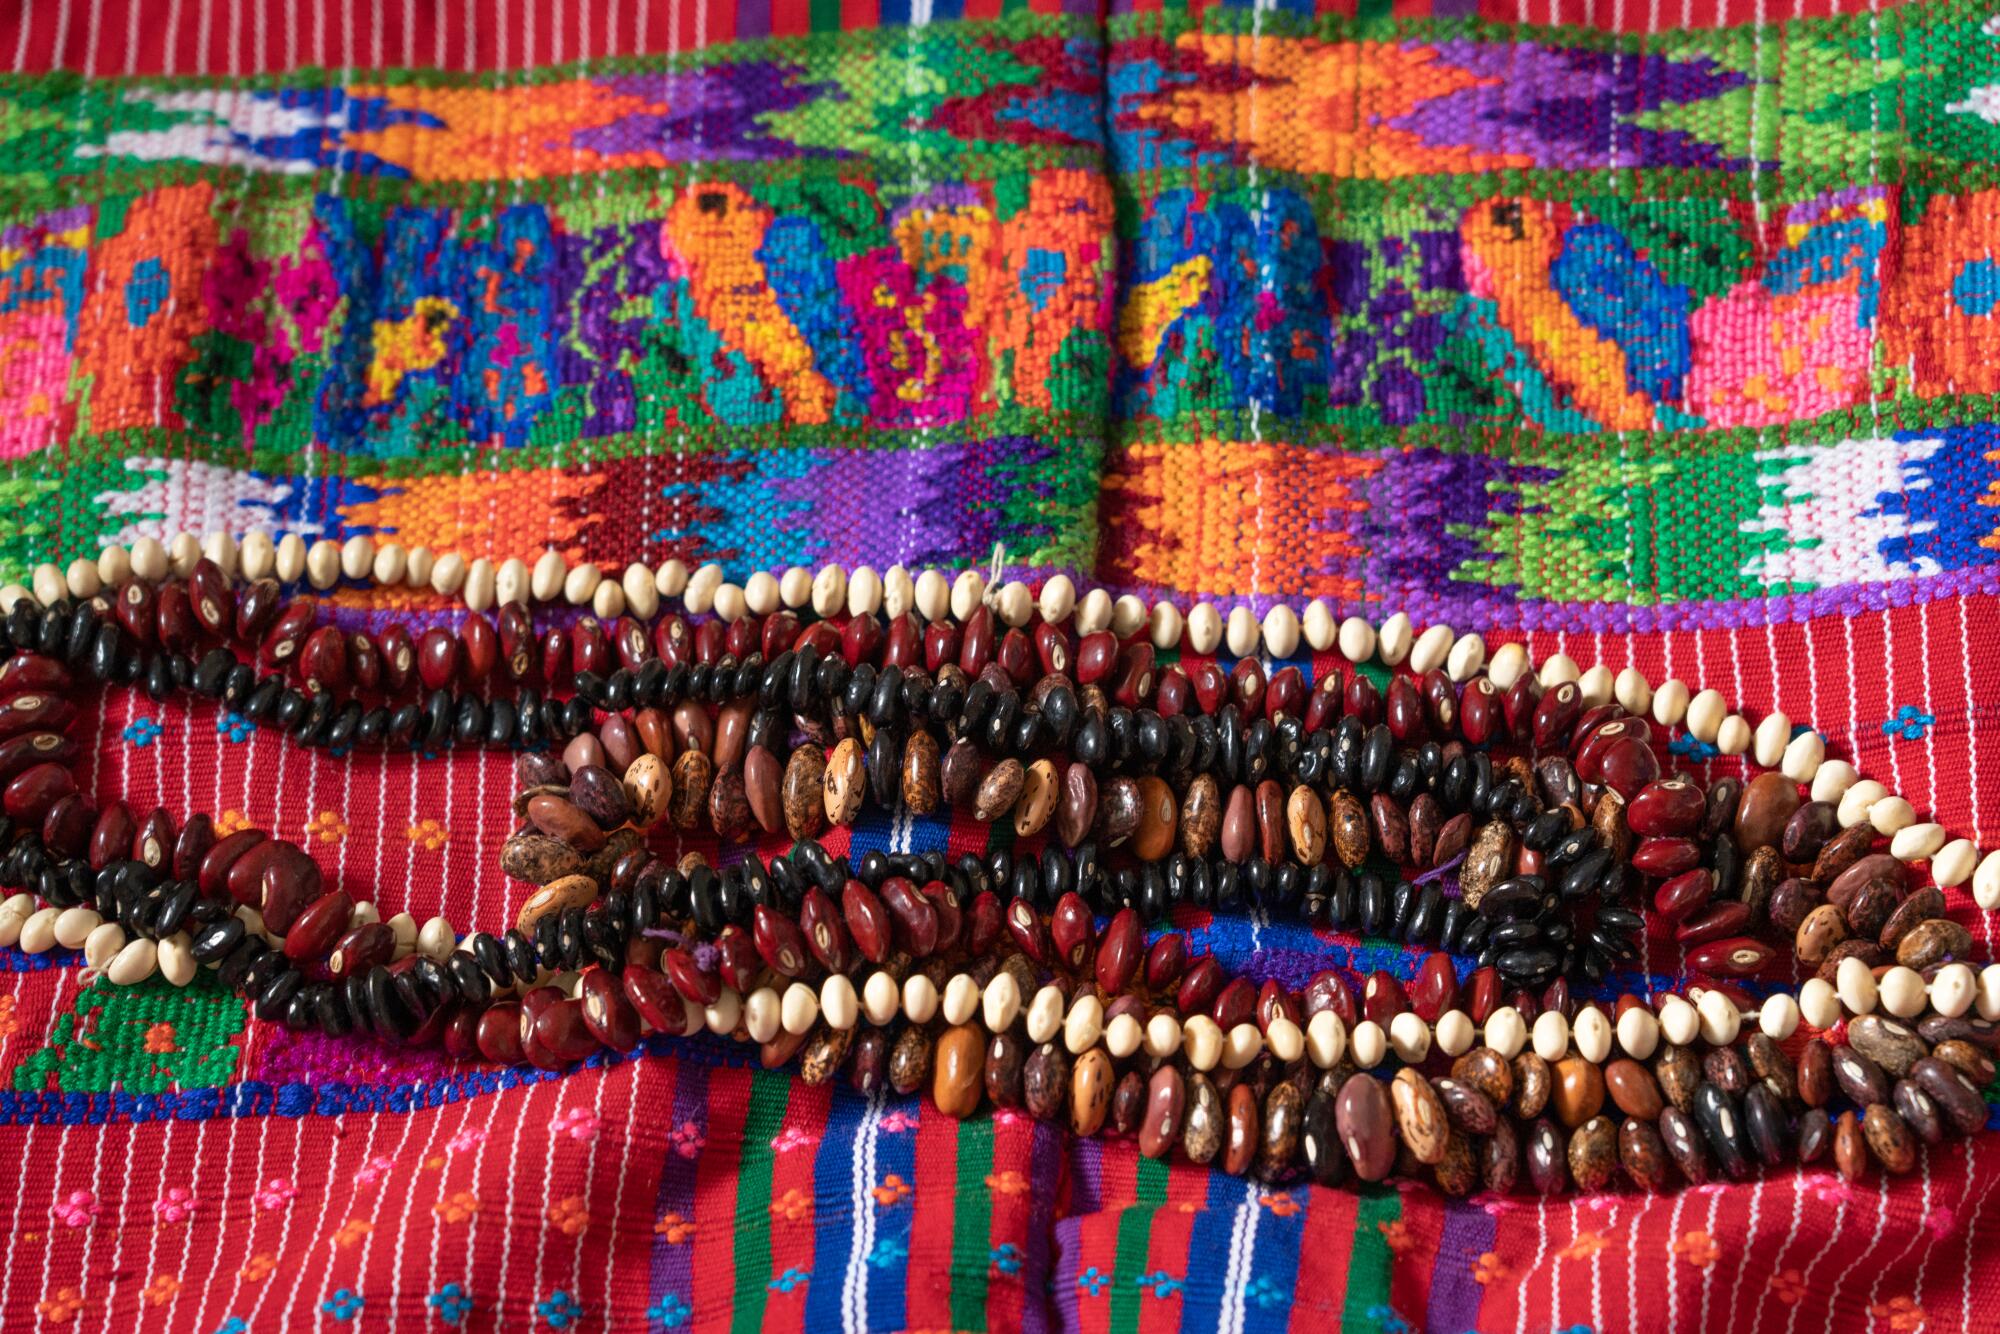 Necklaces made from beans on a colorful woven cloth.